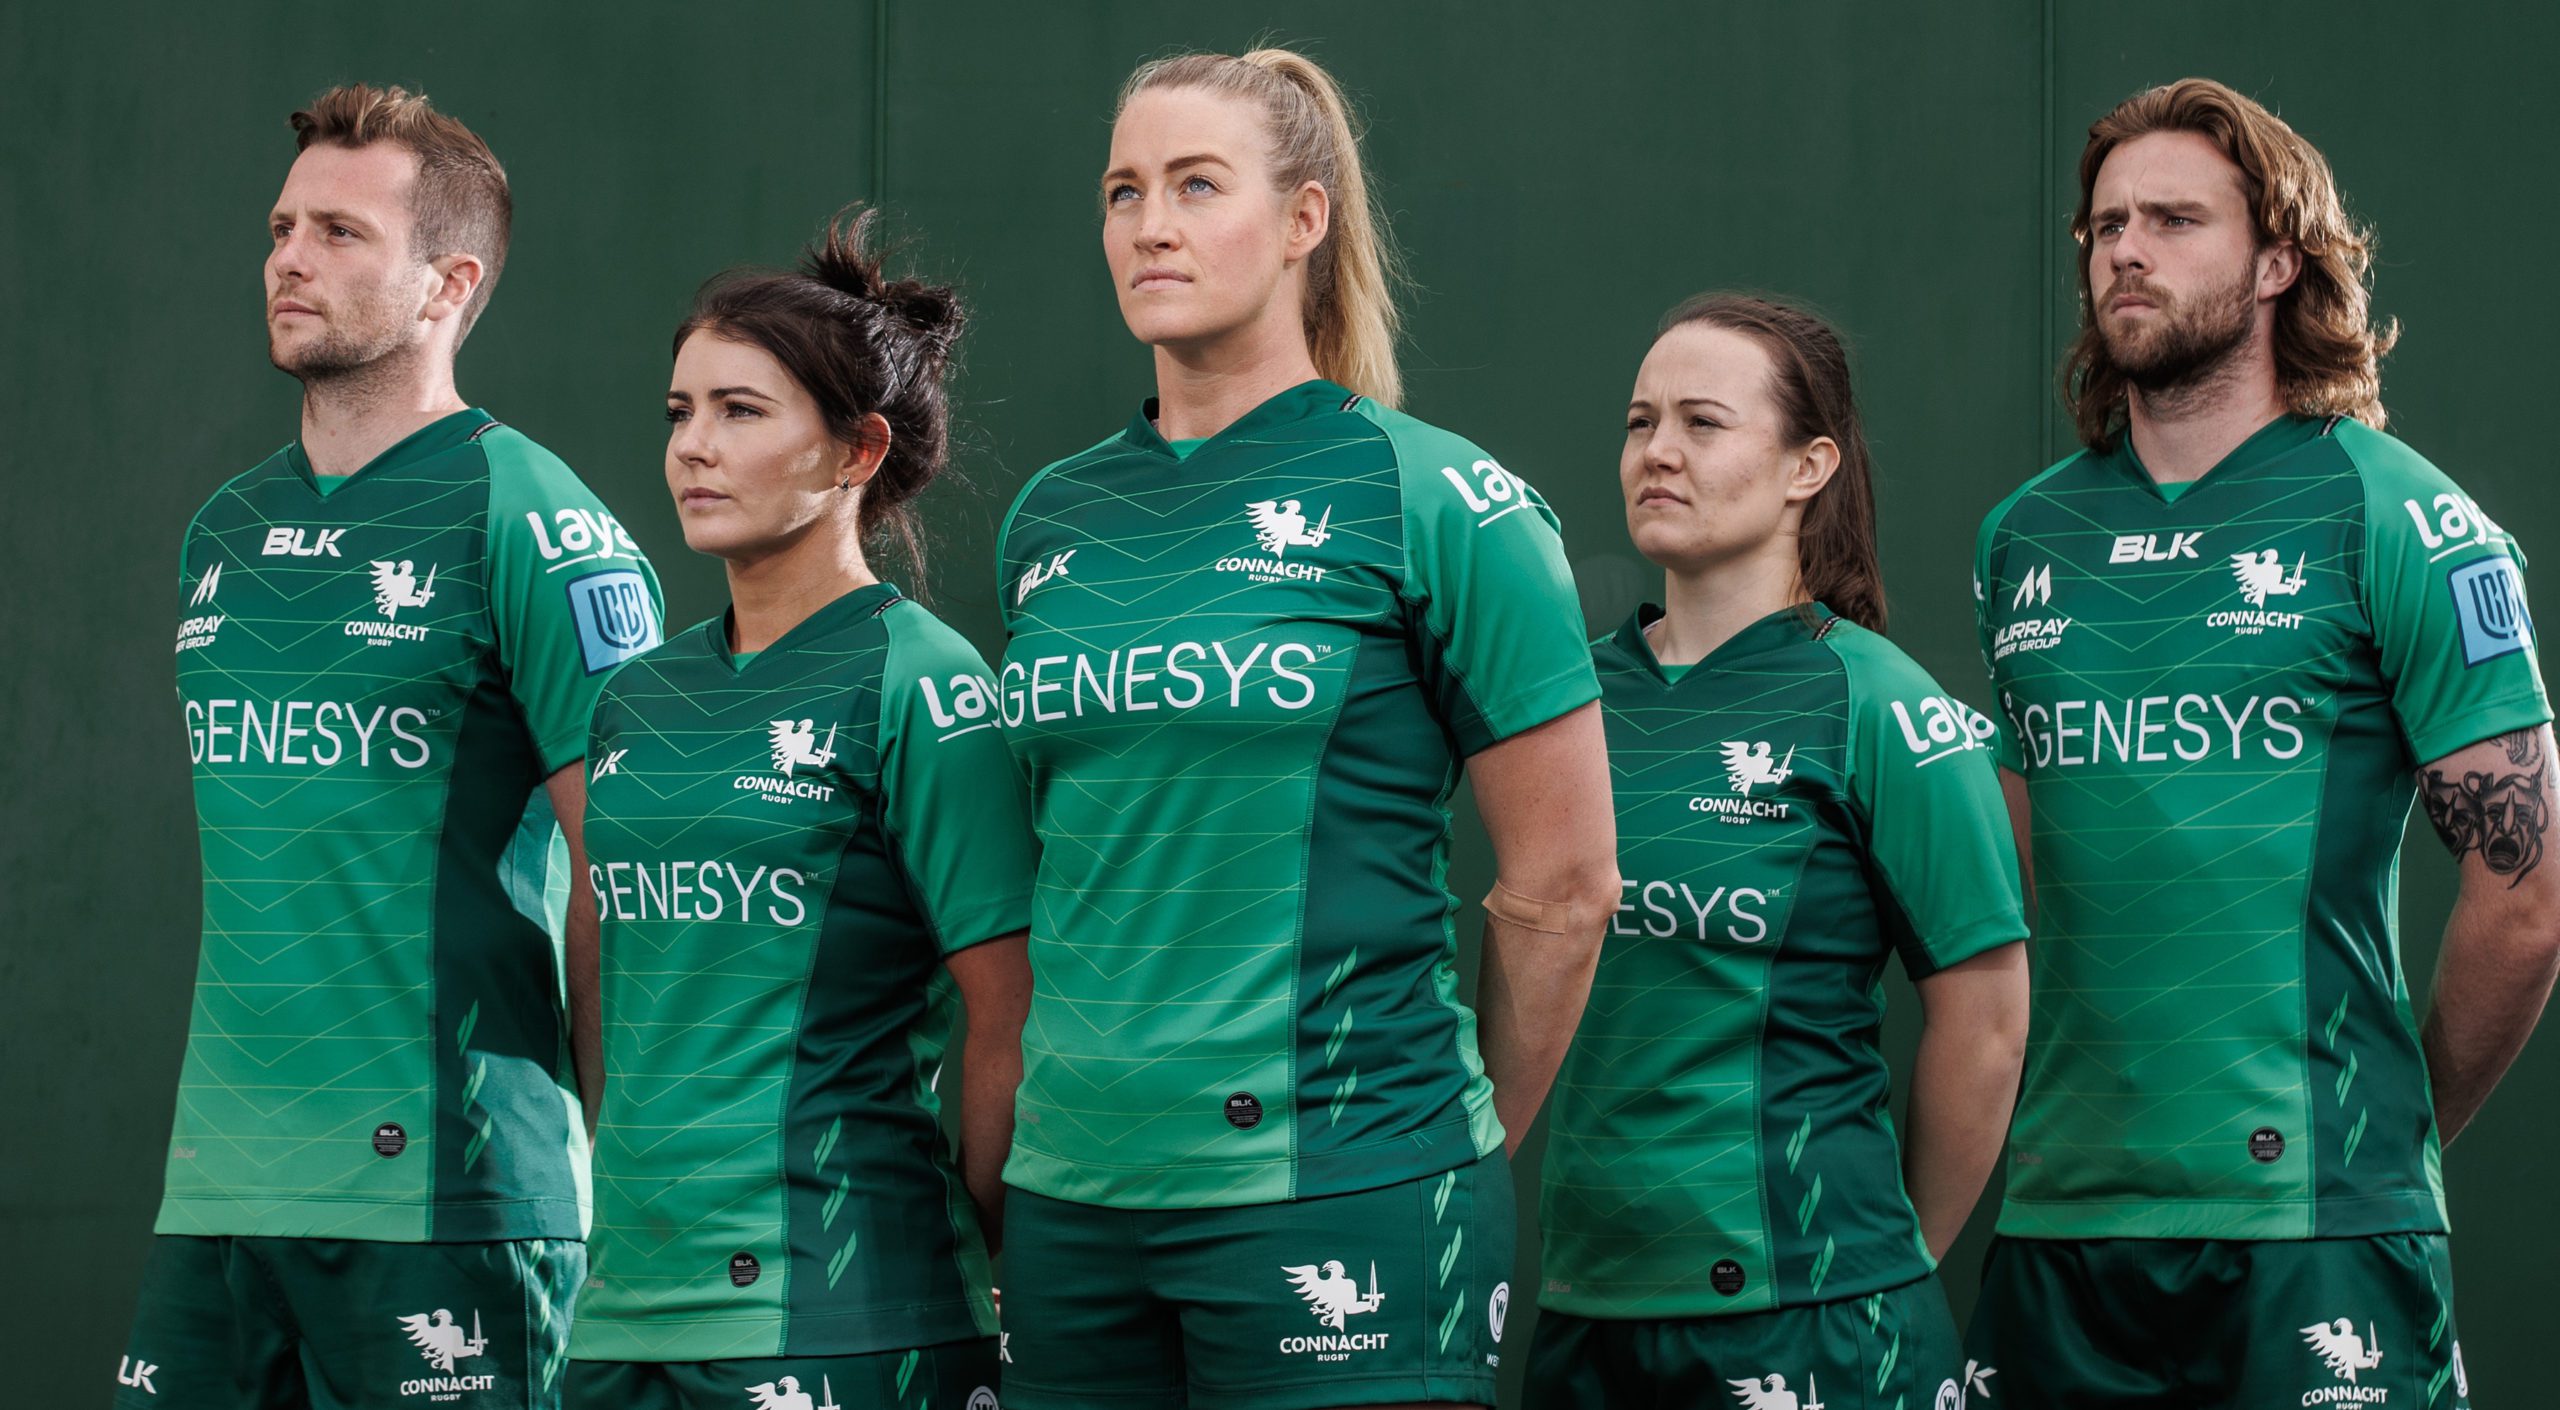 CONNACHT RUGBY AND BLK REVEAL 2022/23 HOME JERSEY